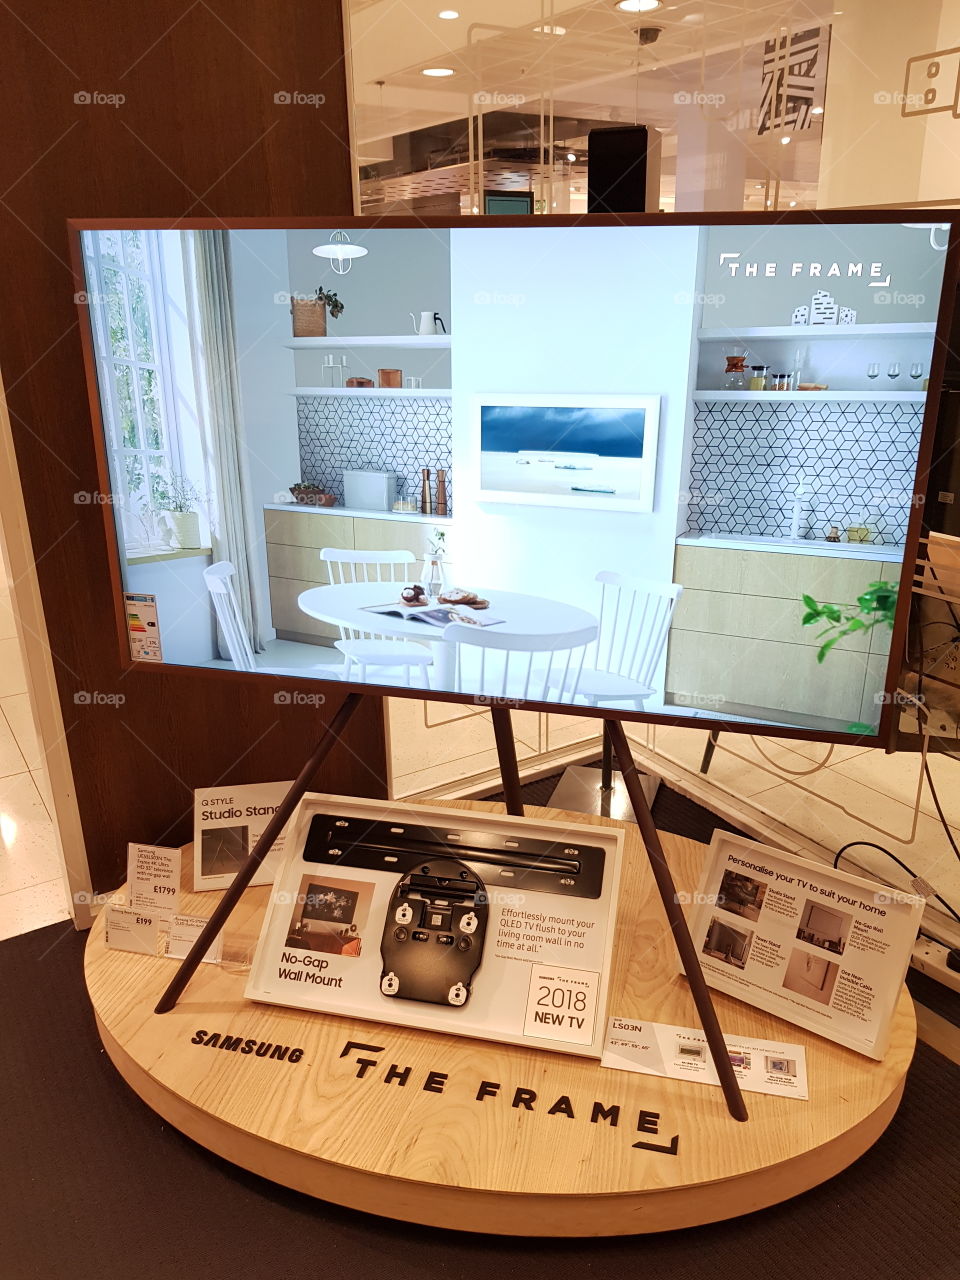 Samsung The Frame TV displaying kitchen set up wall mounted television